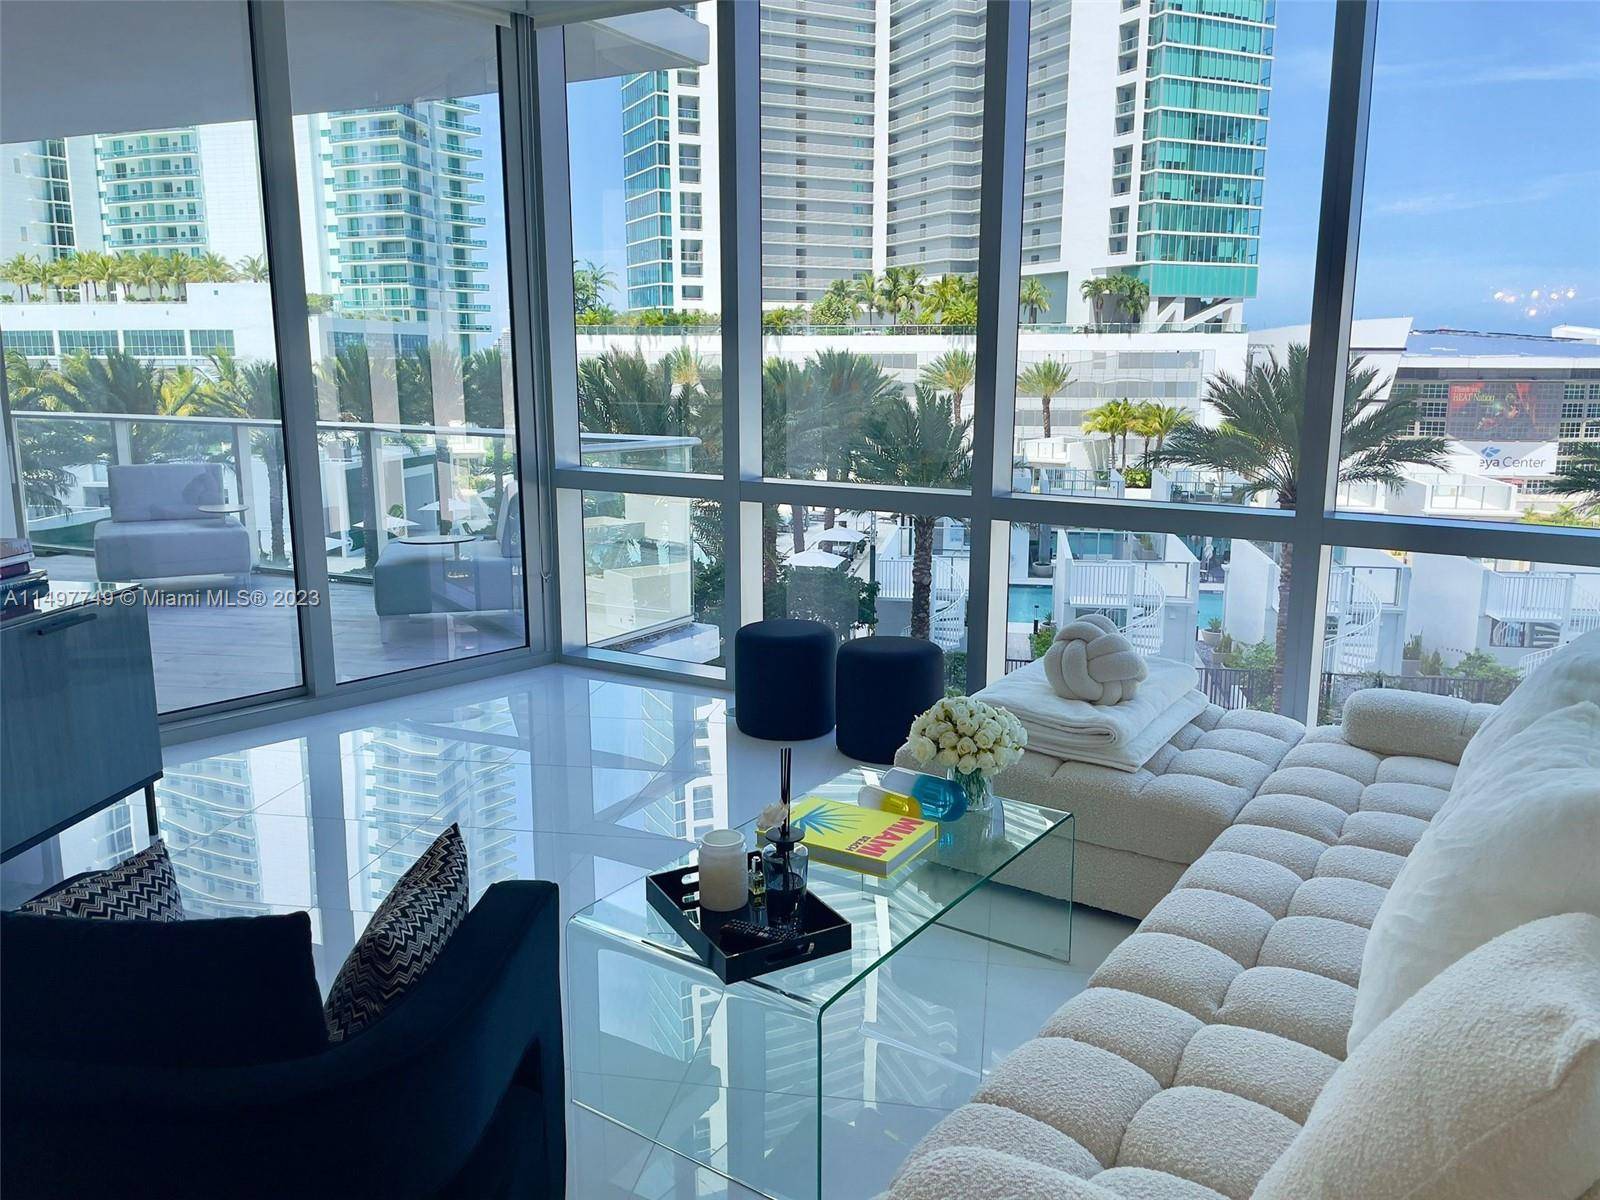 Immerse in the epitome of luxury in this professionally furnished 2 bed plus den, 3 bath residence at the acclaimed Paramount Miami Worldcenter.